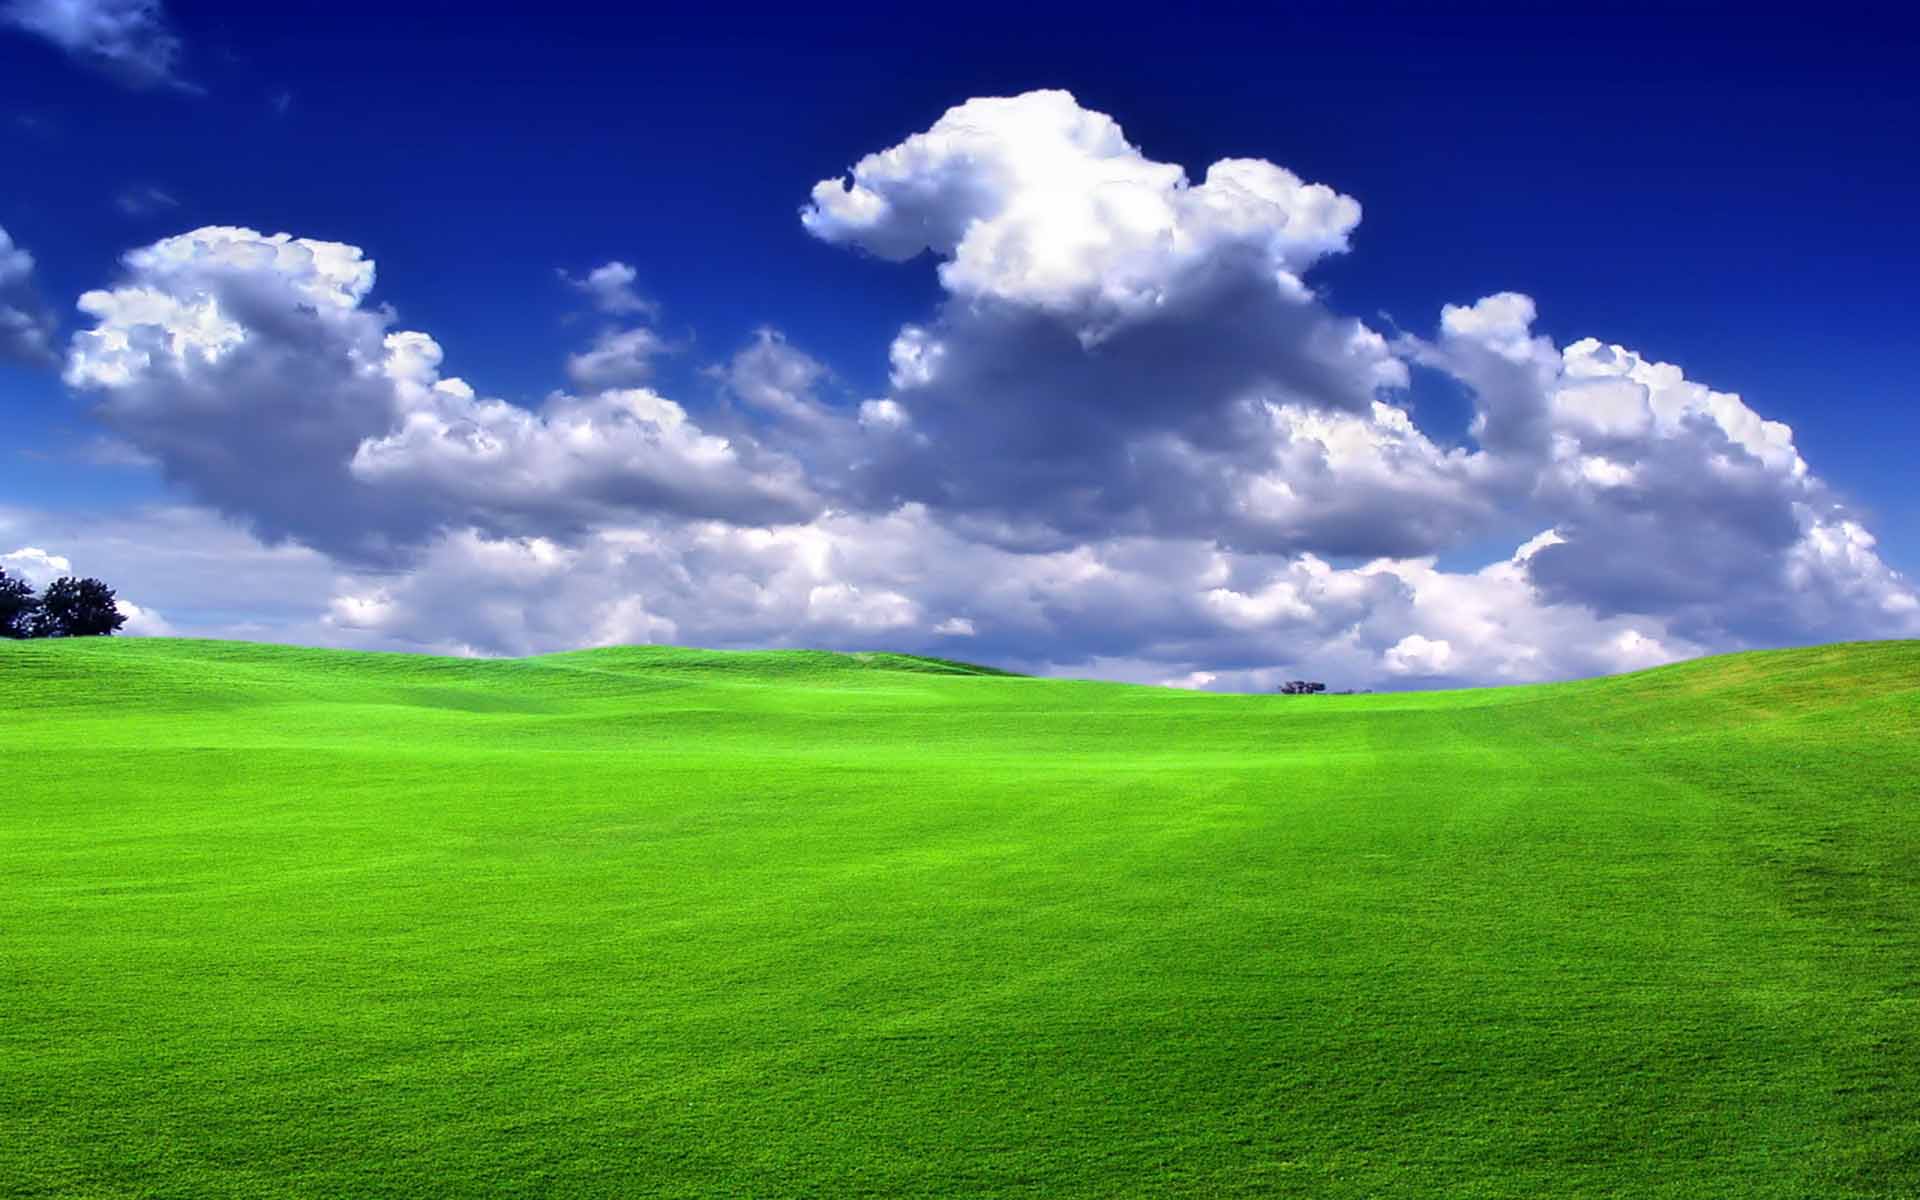 Field HD Wallpapers | Green Fields Images | Cool Wallpapers